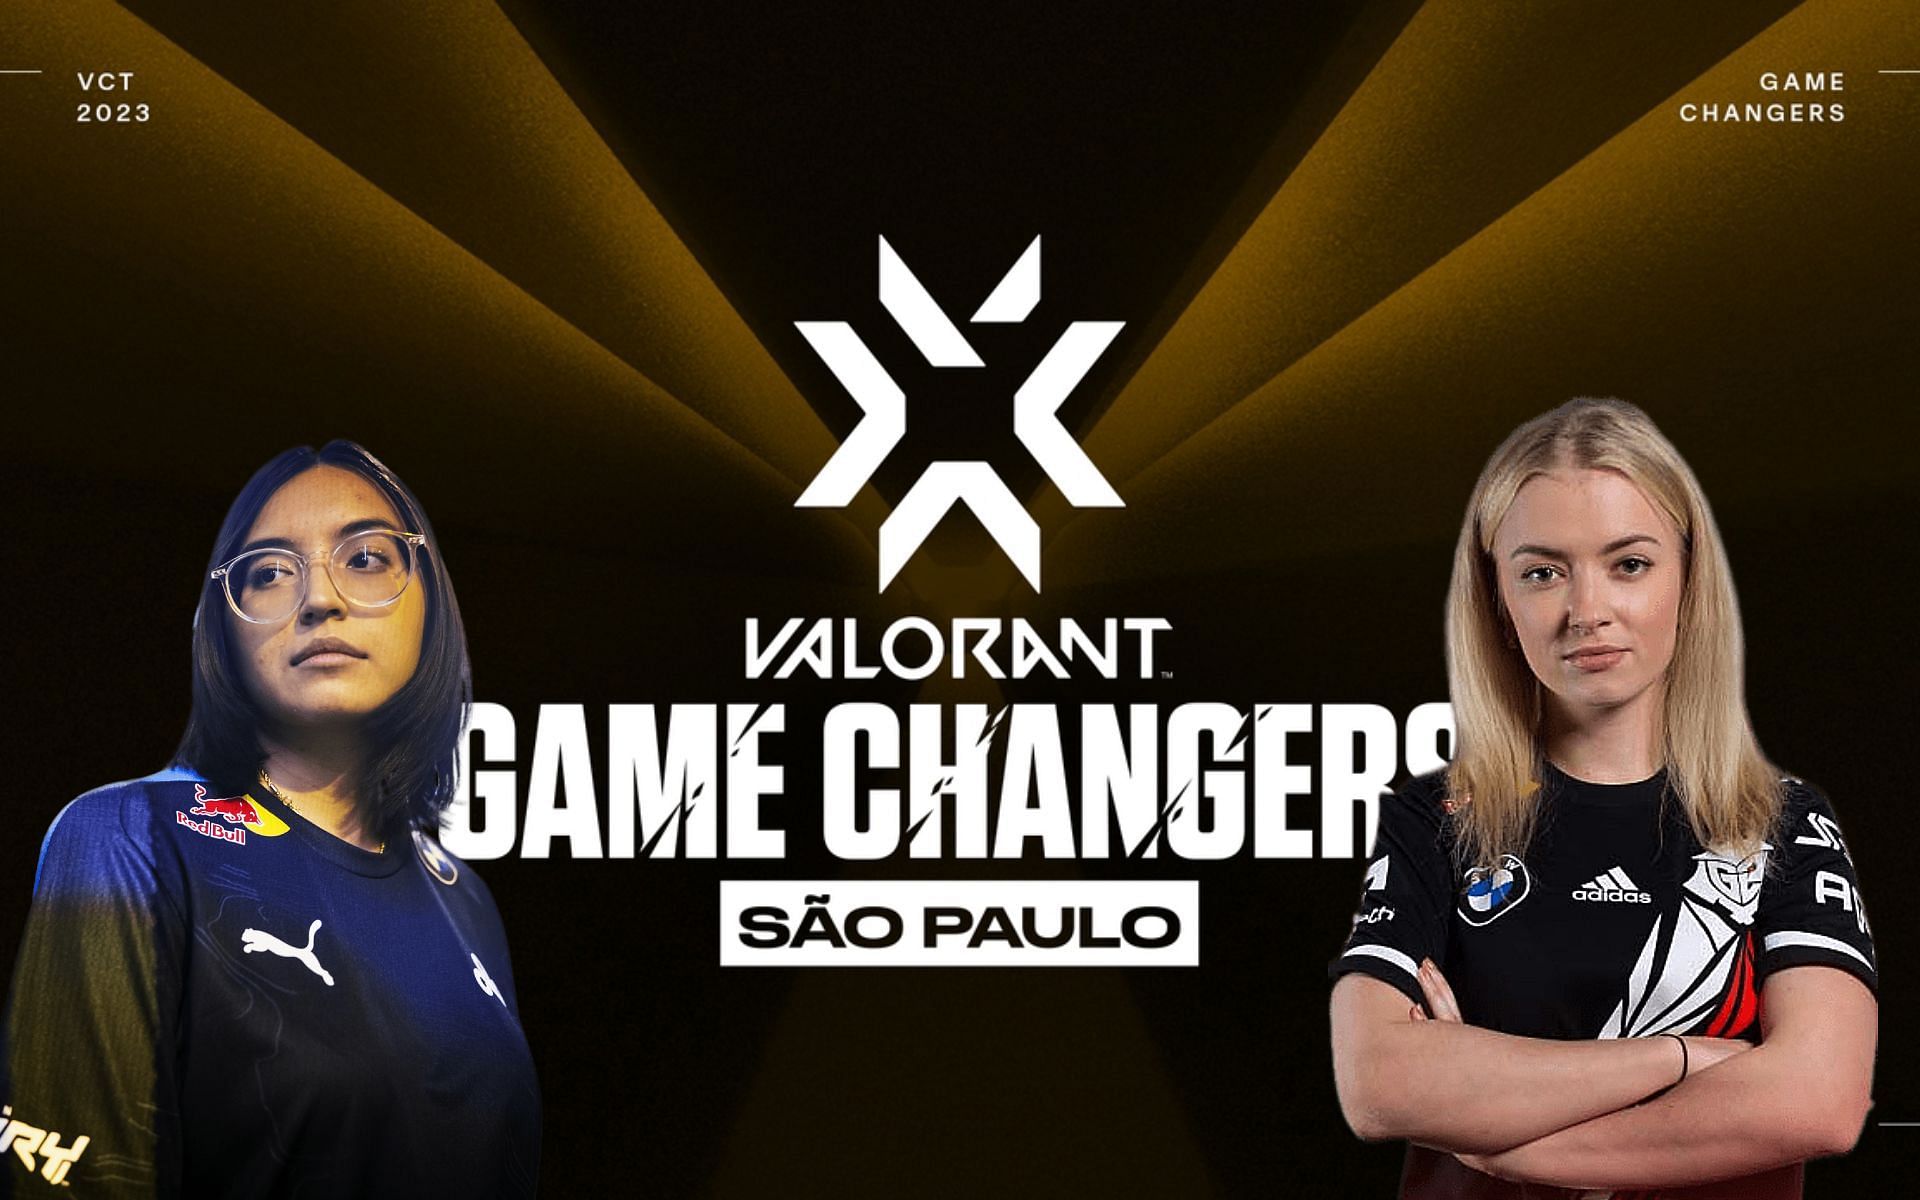 The VCT Game Changers EMEA 2023 Format - Esport